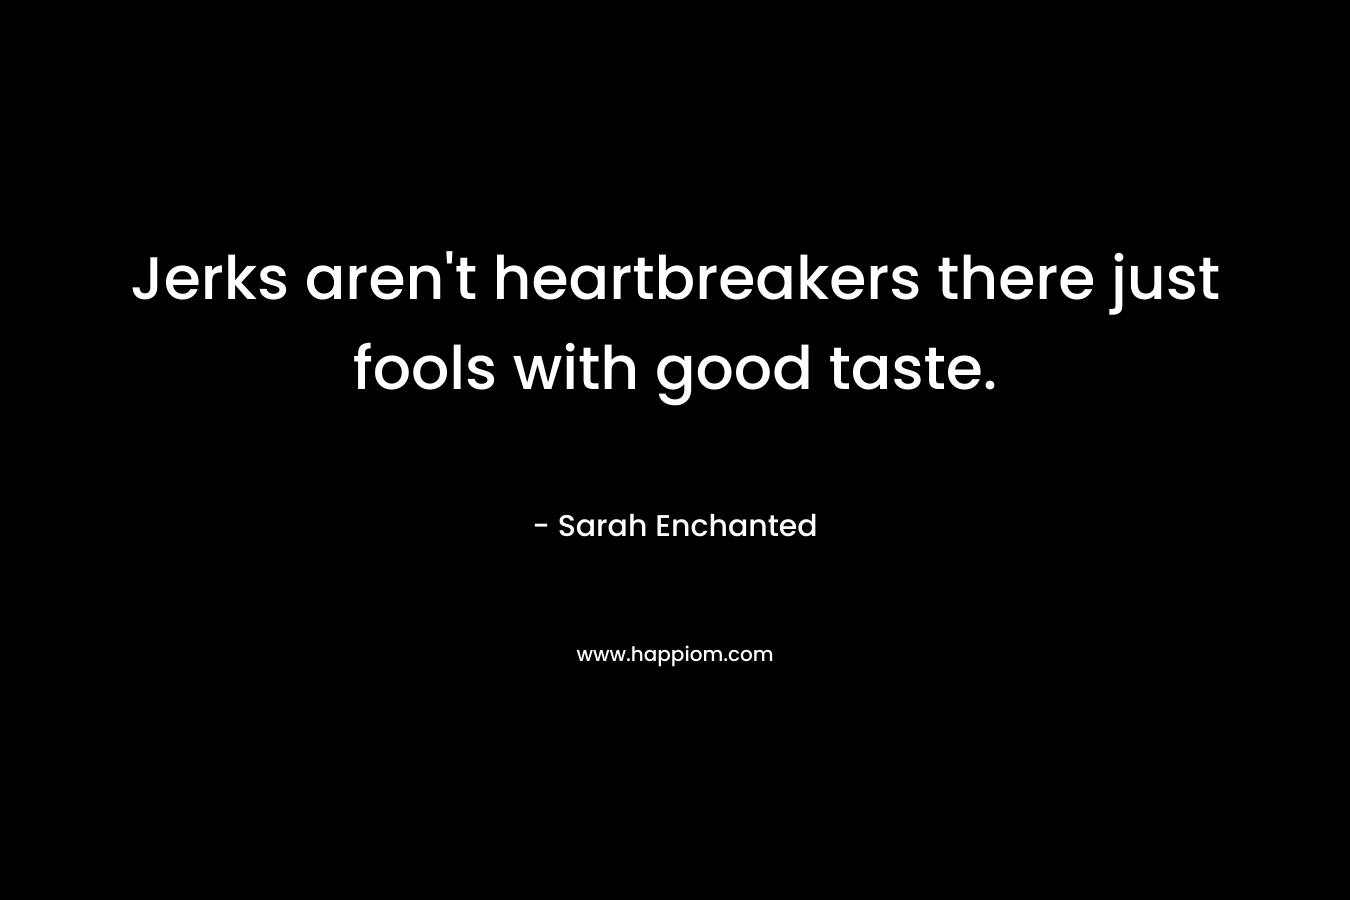 Jerks aren't heartbreakers there just fools with good taste.